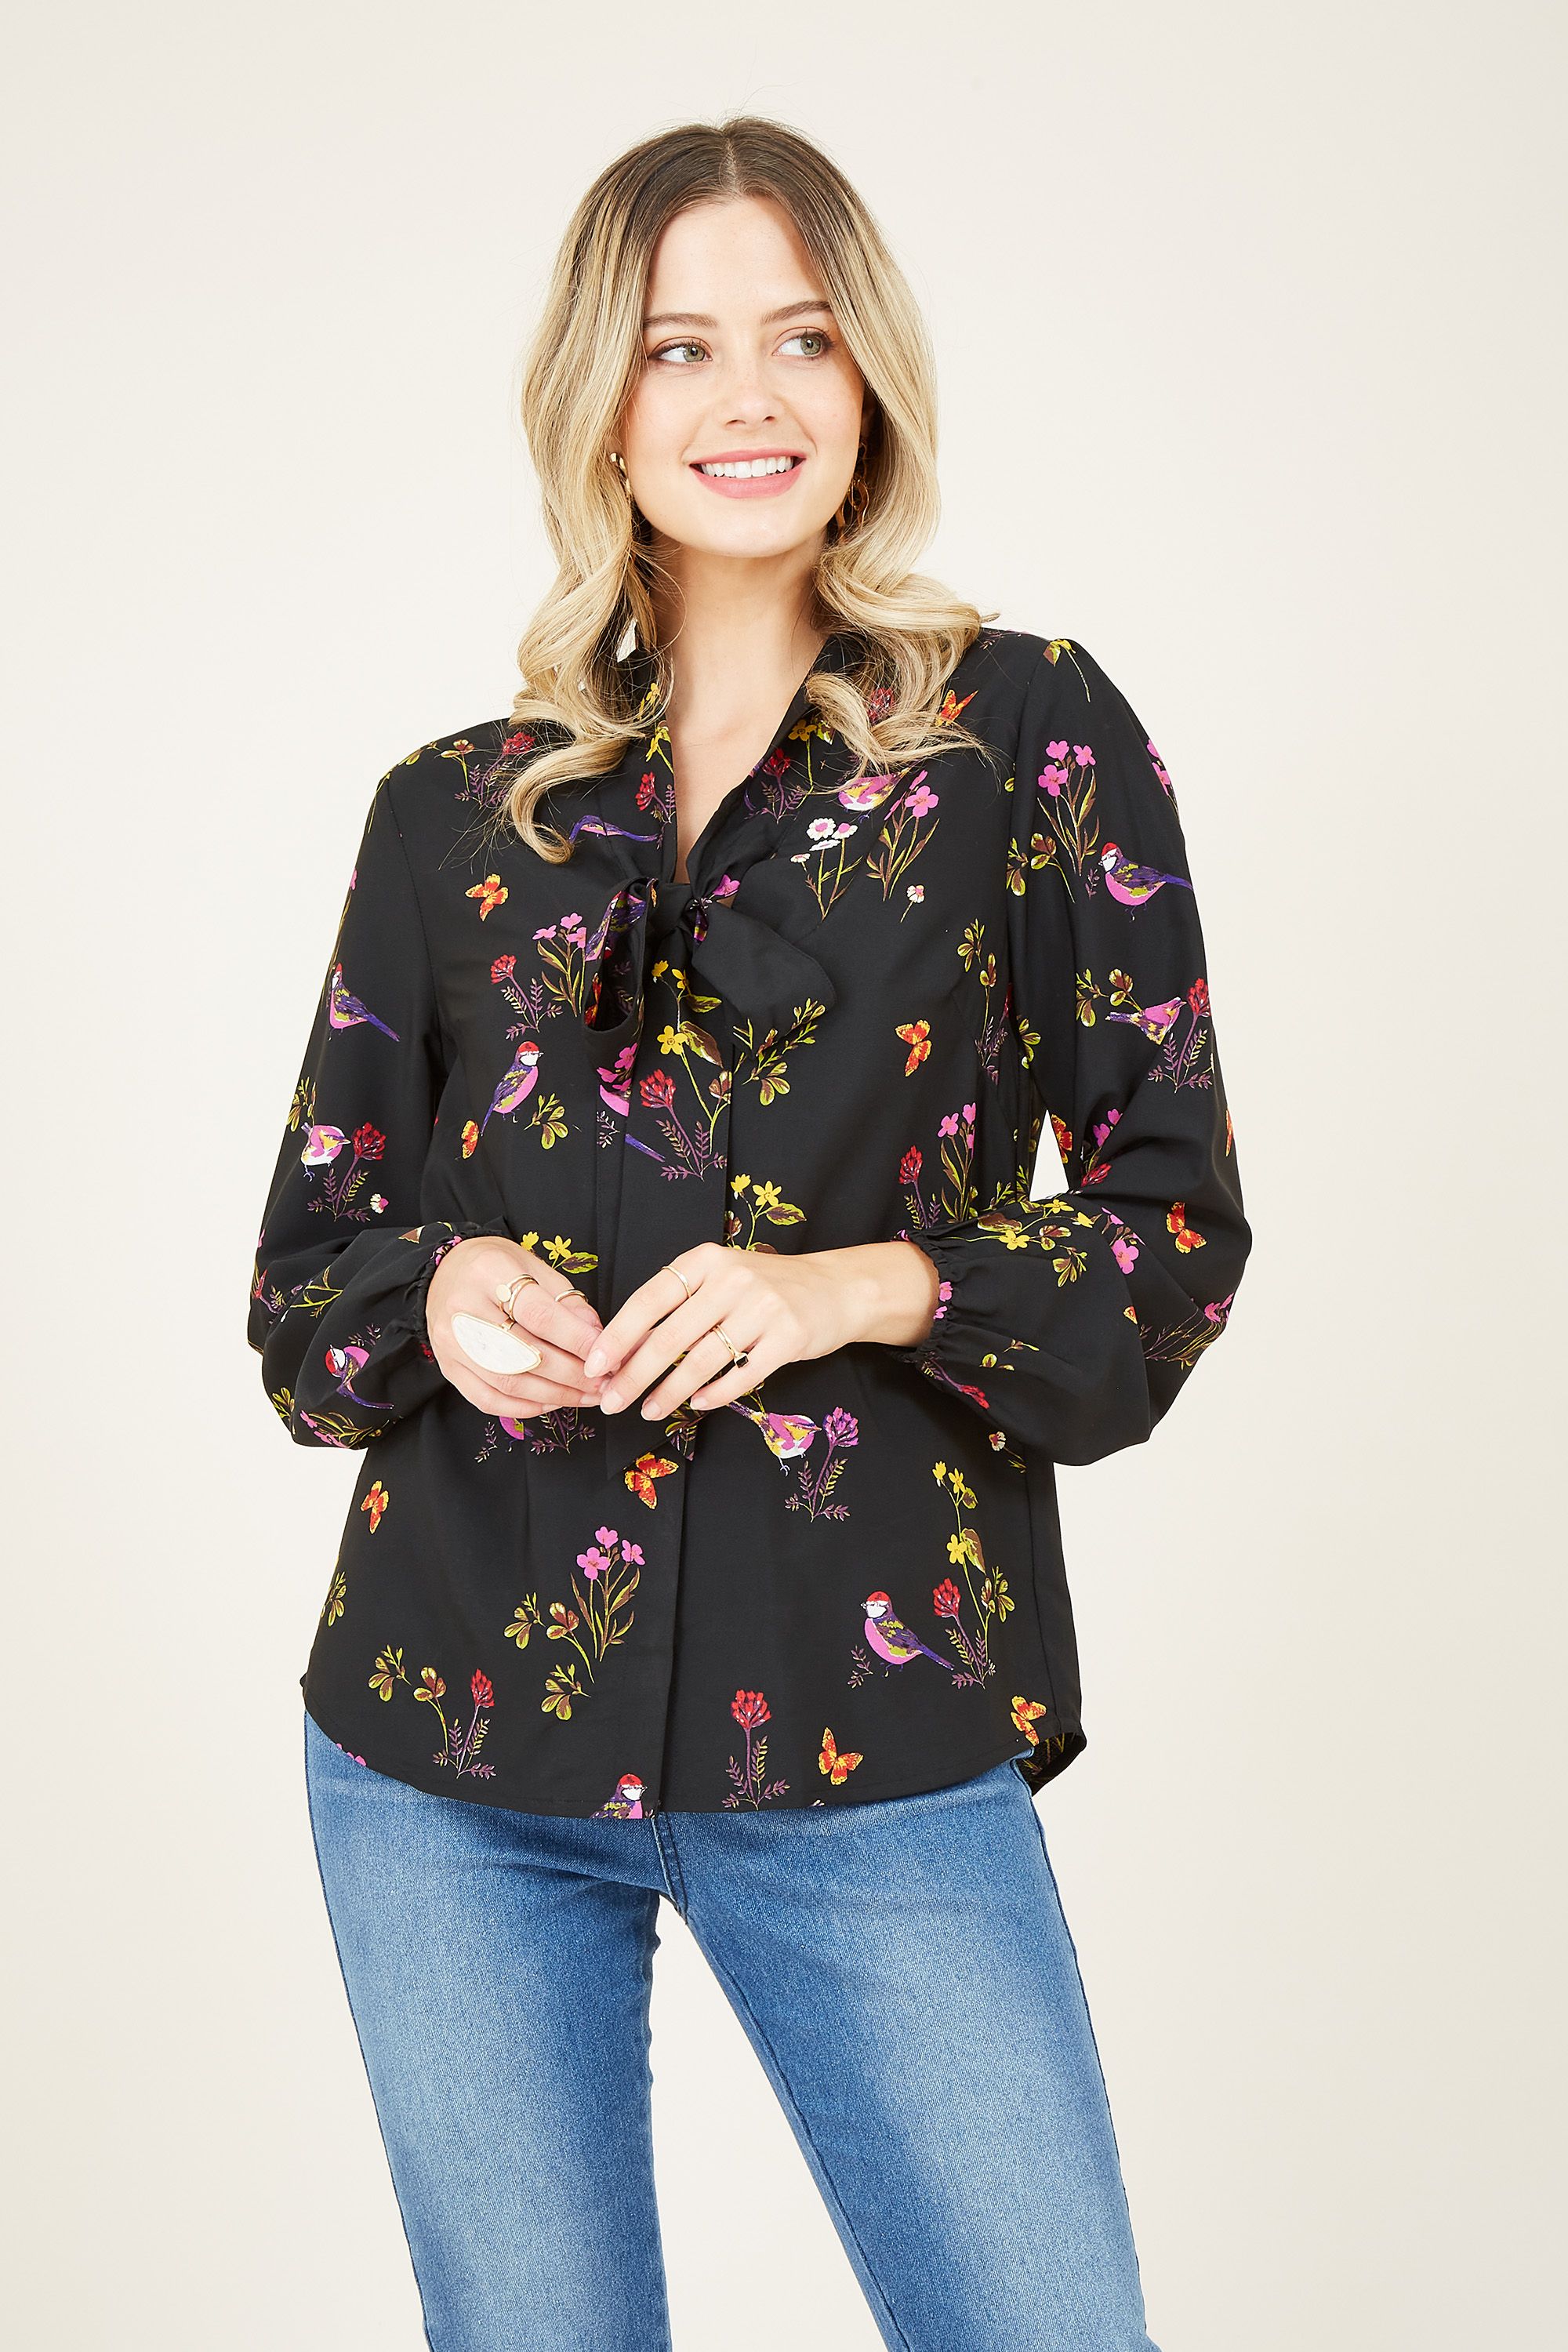 Keep things classic when it comes to your weekend-wear. Detailed with a sweet tweeting print, our Bird Pussy Bow Blouse is a wardrobe must-have. Cut from lightweight fabric, it's designed with a retro pussy bow neckline to balance the relaxed shape. Team it with jeans for a classic off-duty look.